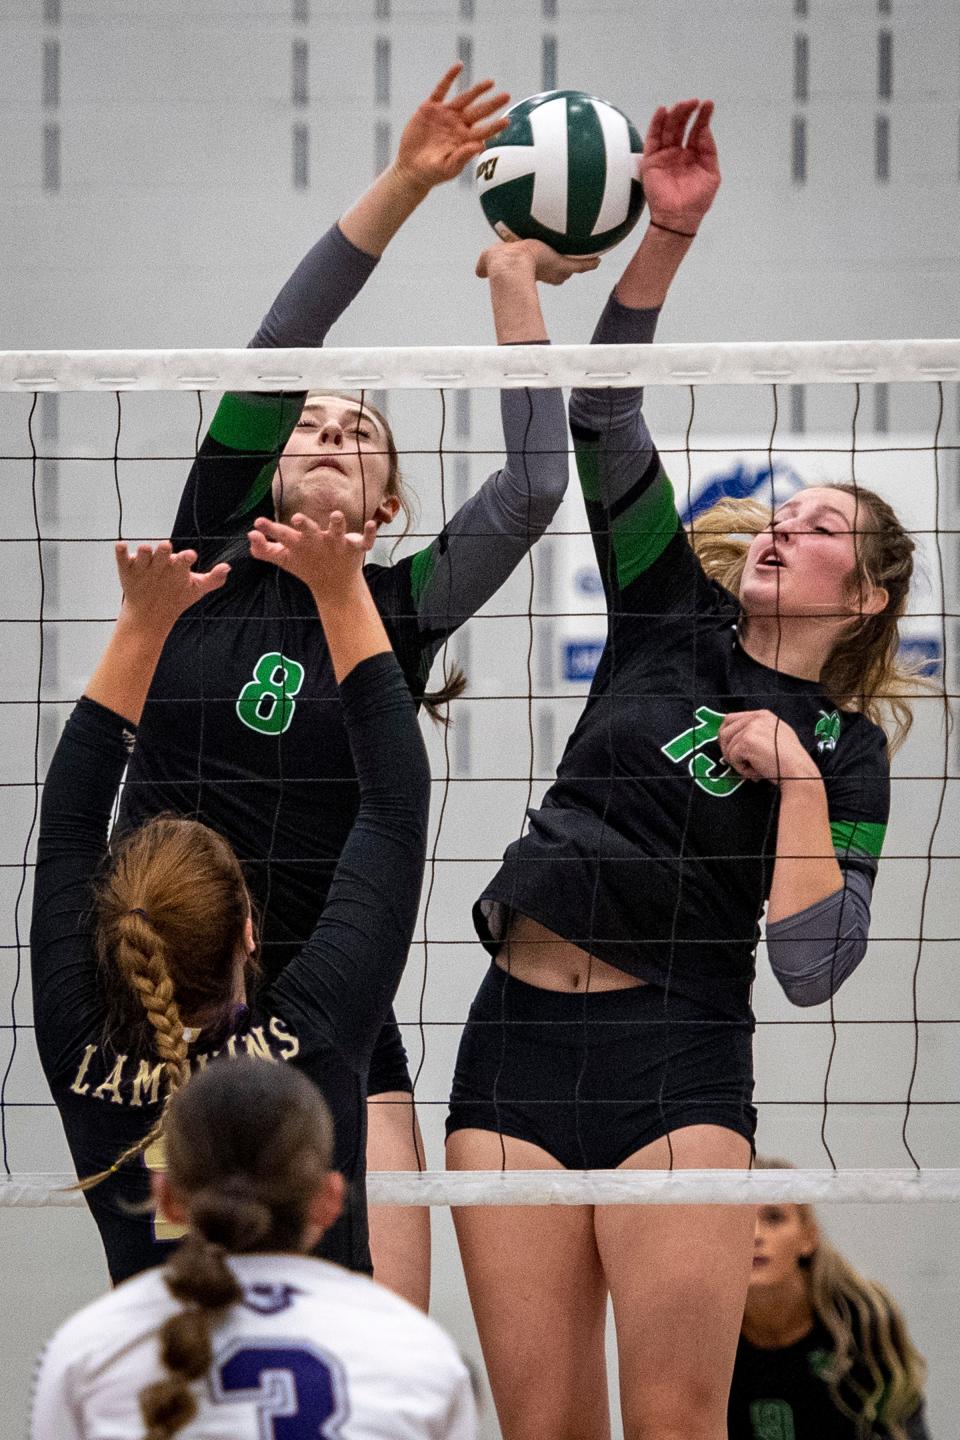 Fossil Ridge volleyball players Delaney Ewing, left, and Maya Siple defend the net against a hit by Fort Collins' Claire Wagstaff during their match at Fossil Ridge High School on Thursday.